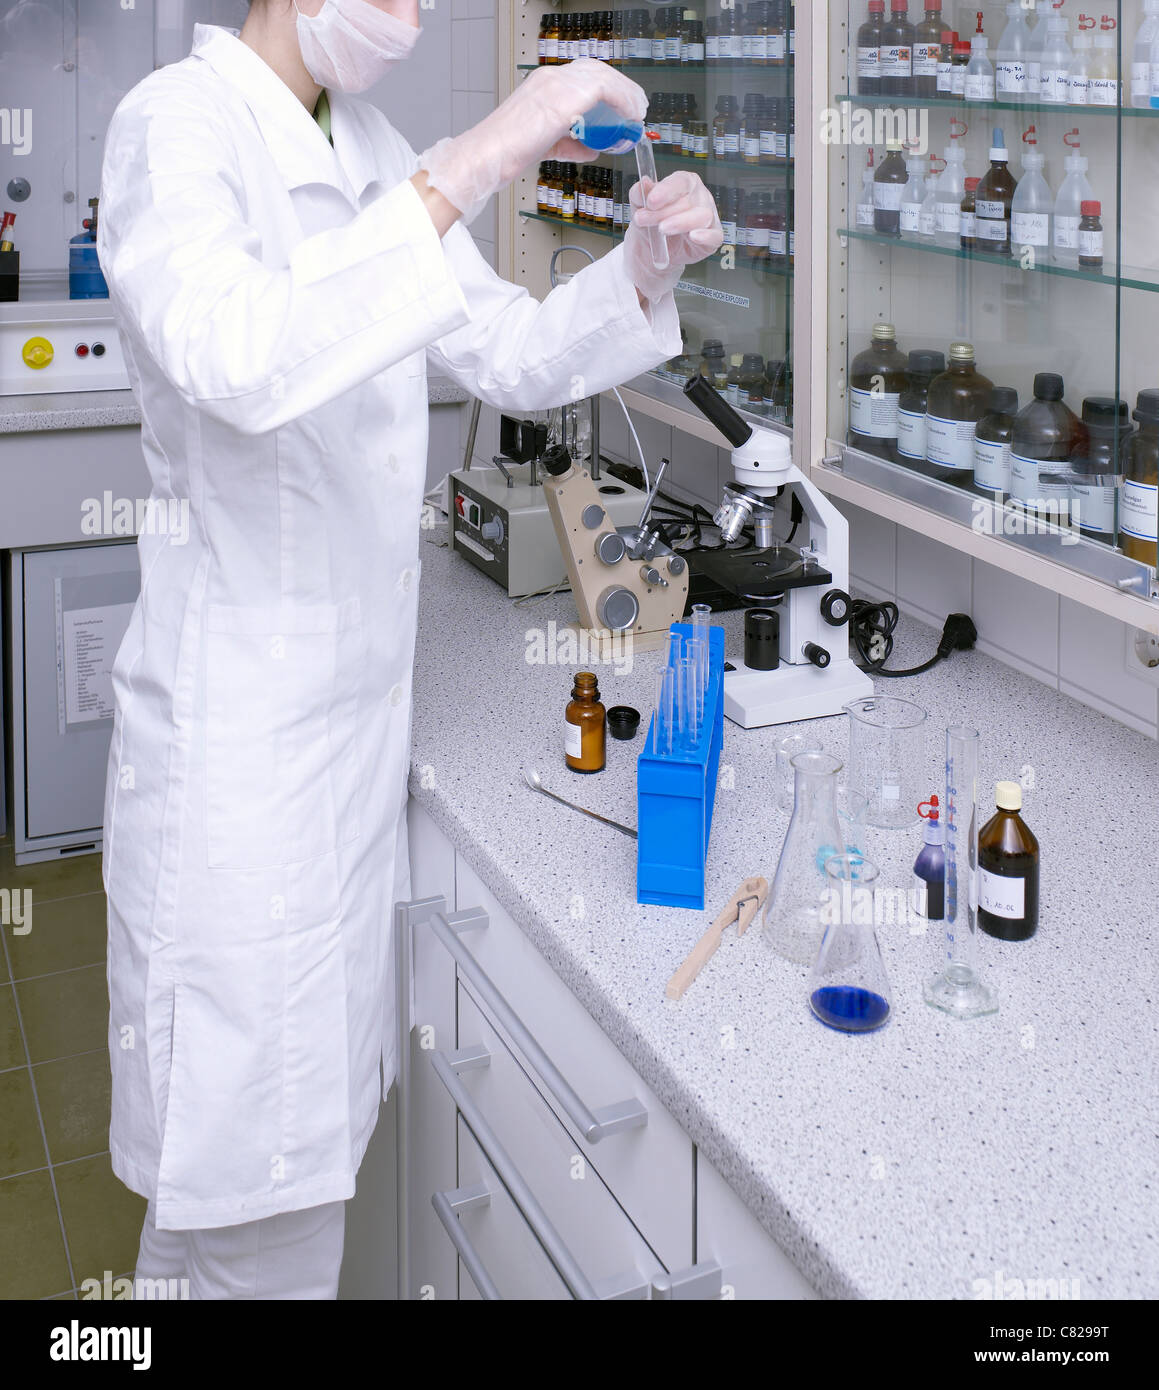 a woman working in a medical lab Stock Photo